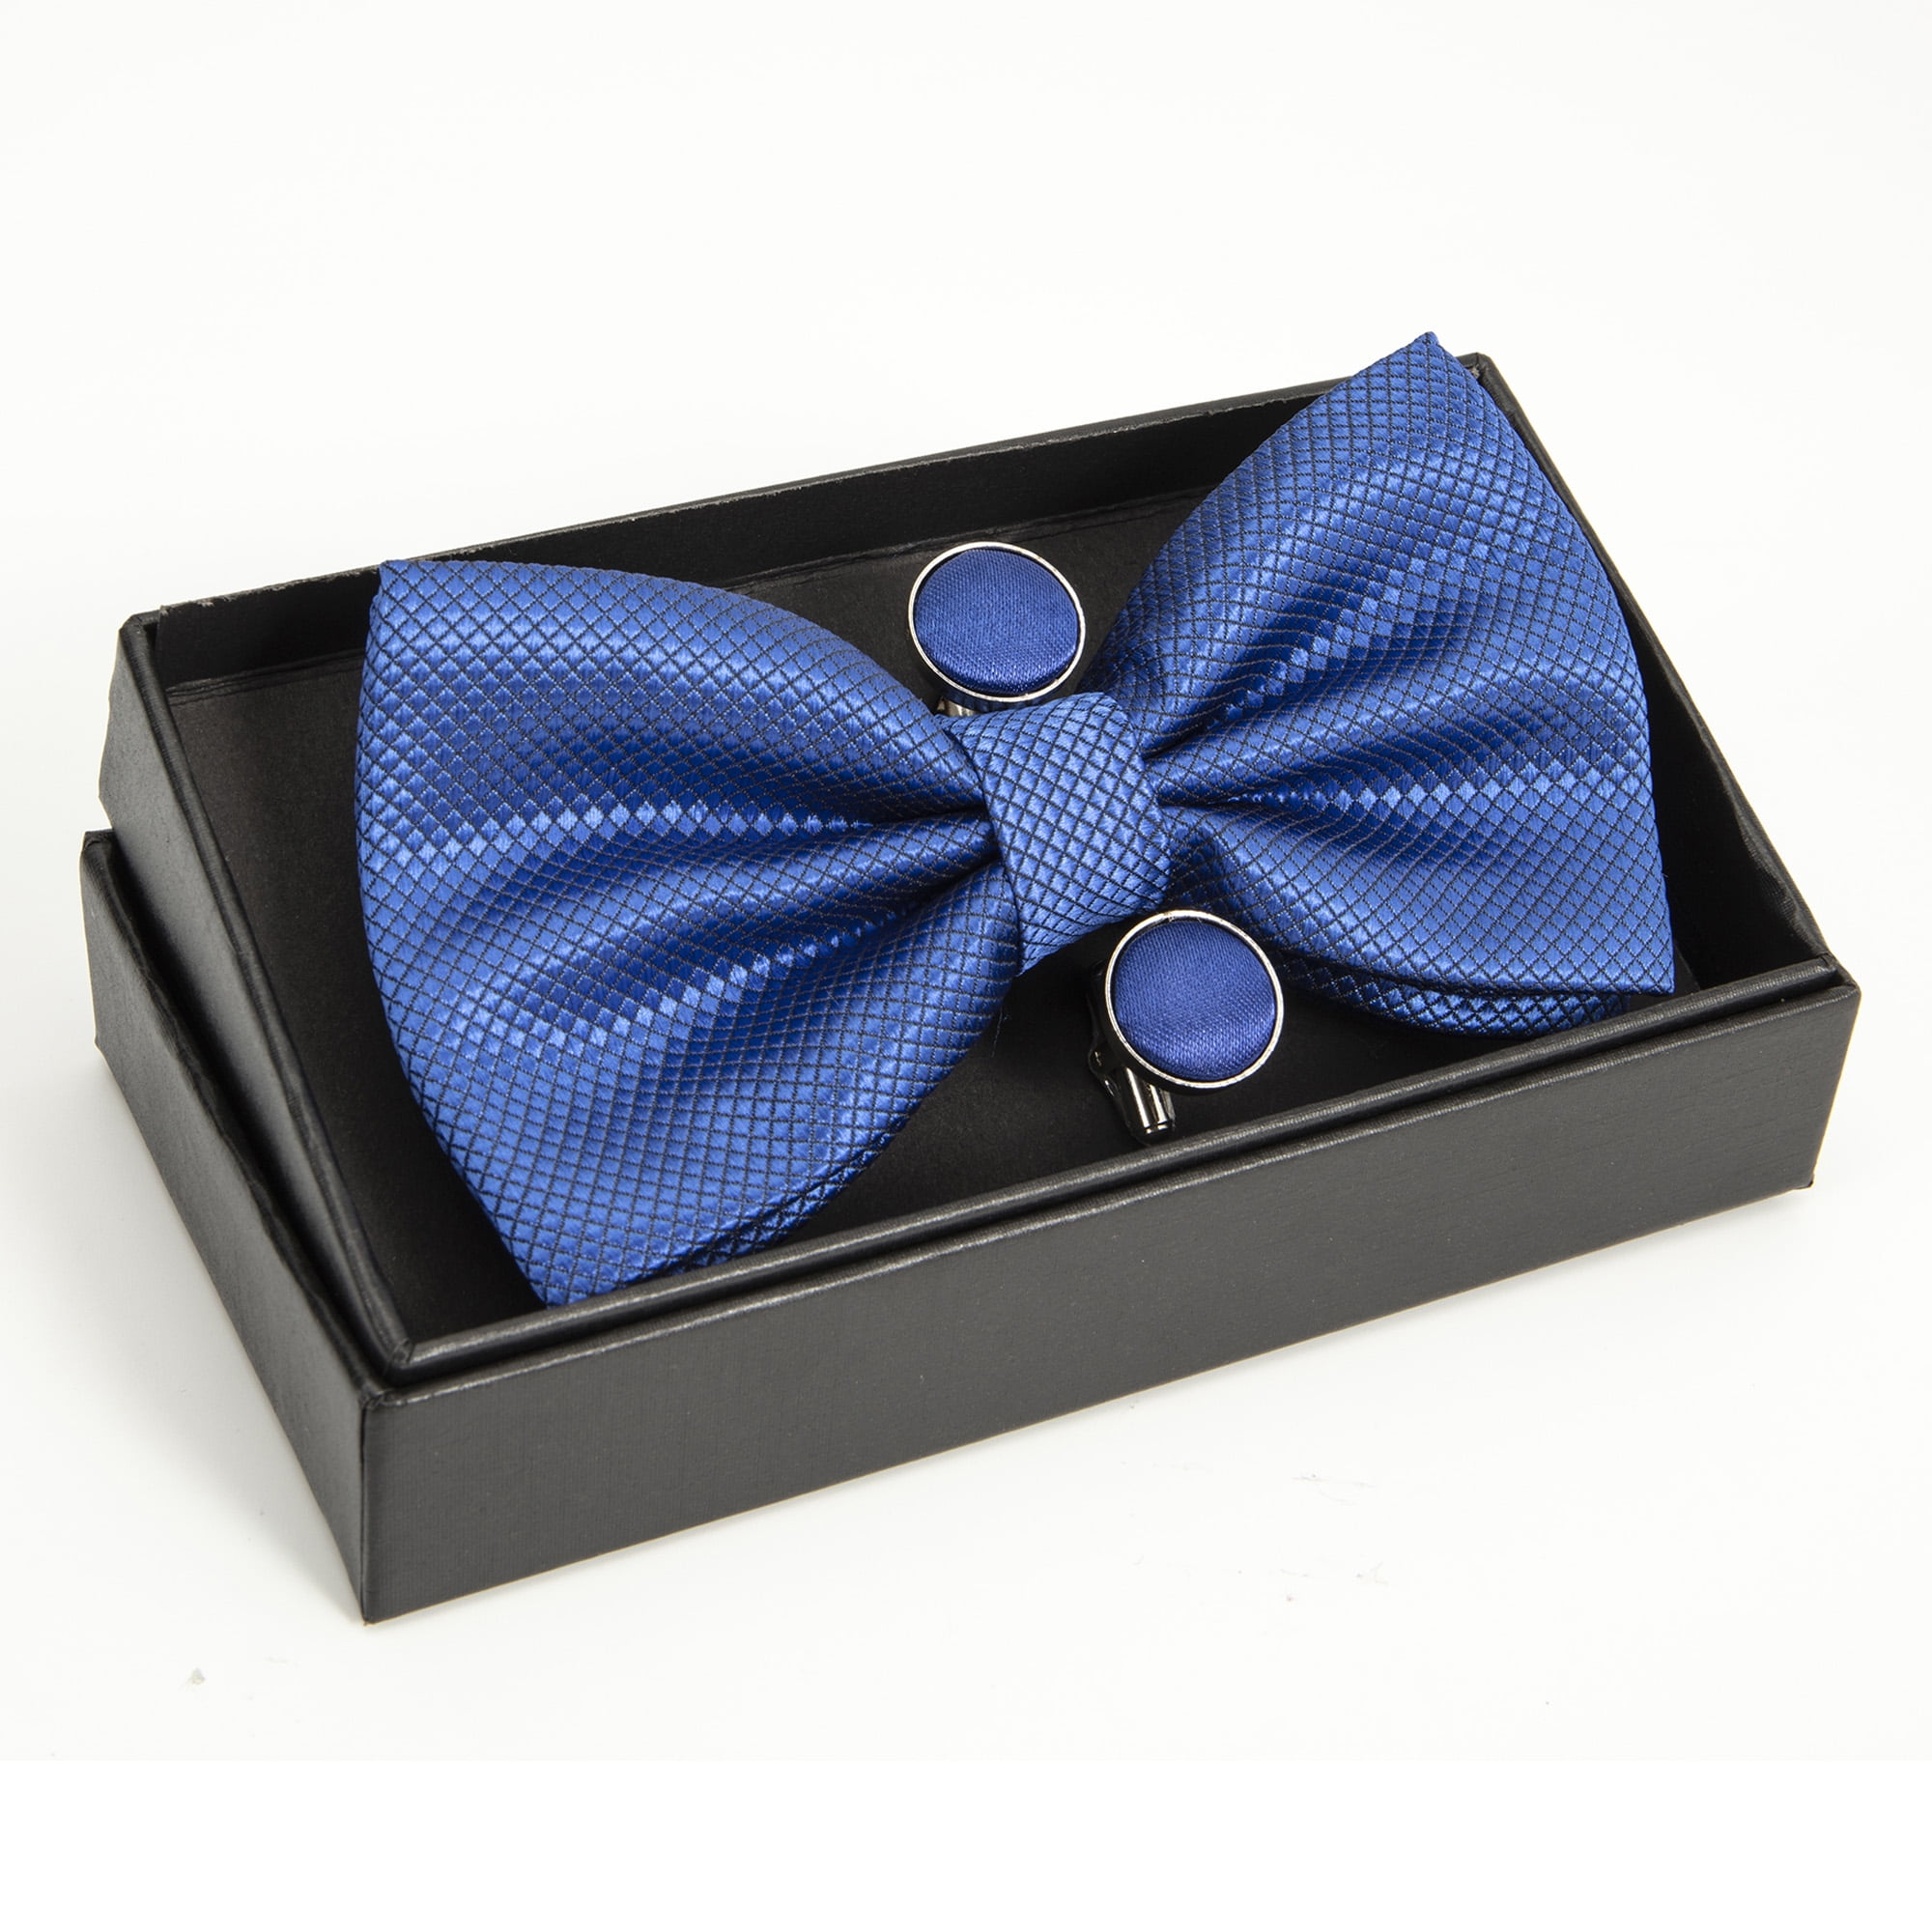 BLACK RED DESIGNS WITH CUFFLINKS GREY FANTASTIC CHOICE OF BOXED TIE SETS BLUE